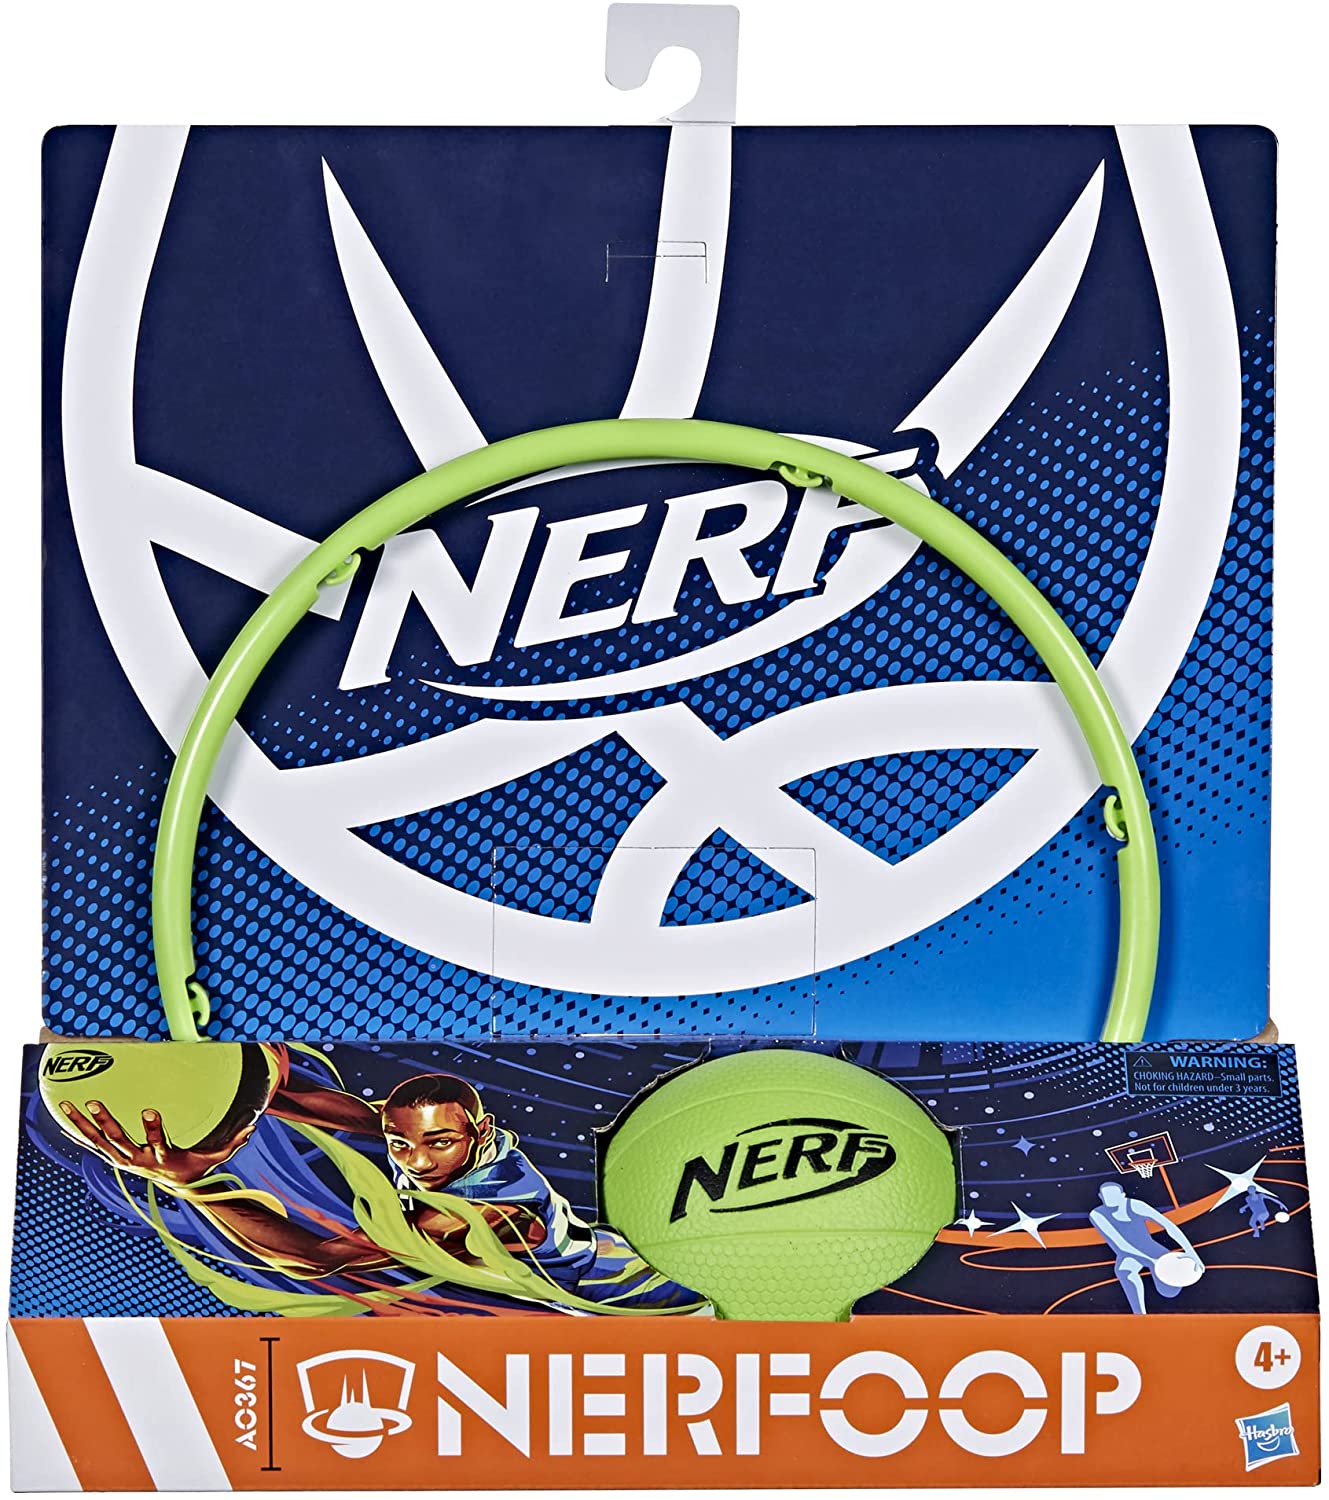 NERF Nerfoop – The Classic Mini Foam Basketball and Hoop - Hooks On Doors - Indoor and Outdoor Play